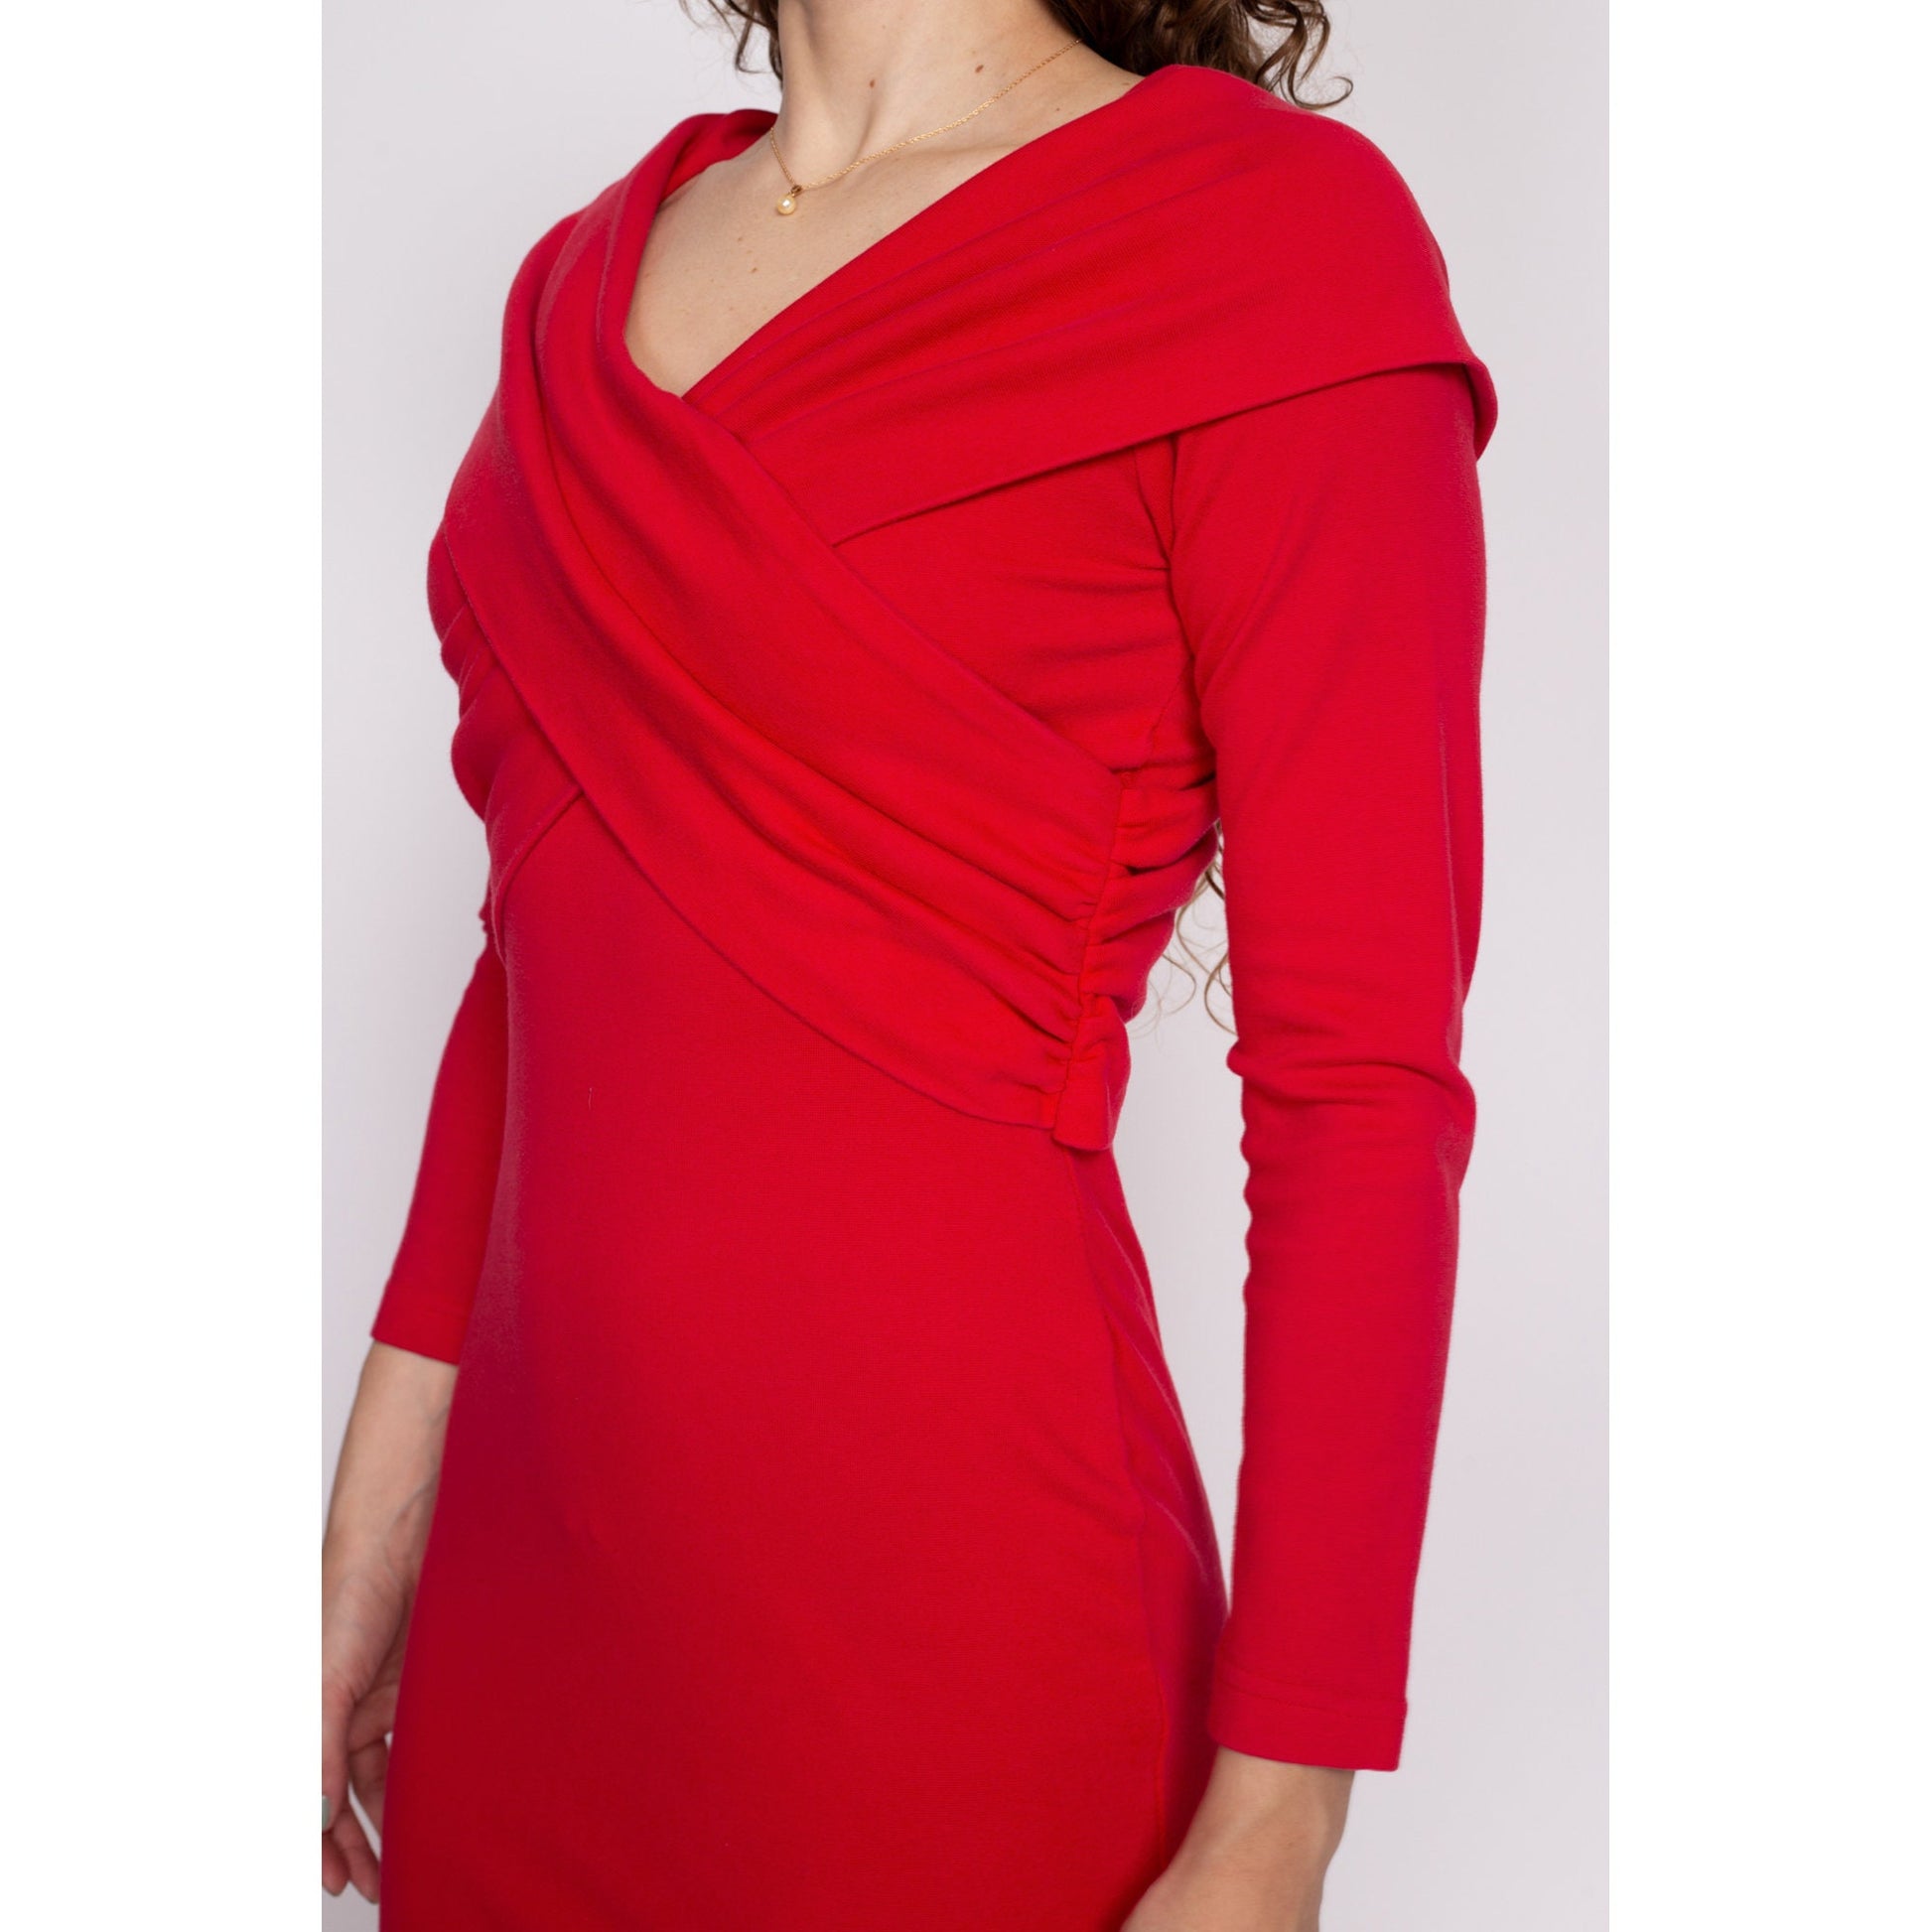 M| 80s Red Criss Cross Bodycon Dress - Medium | Vintage Long Sleeve Fitted Stretchy Mini Dress